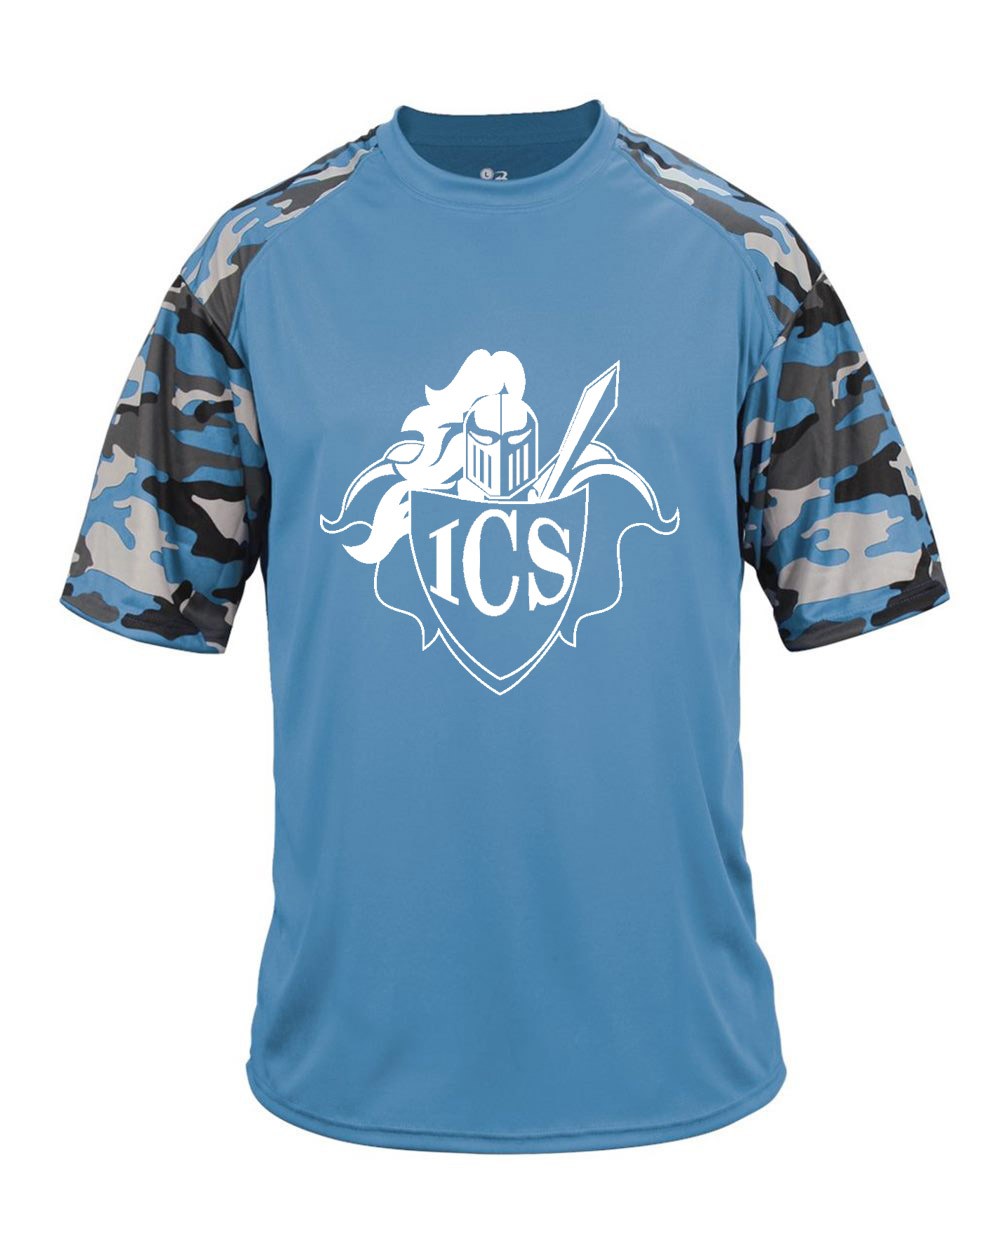 ICS Spirit S/S Camo T-Shirt w/ White Logo - Please Allow 2-3 Weeks for Delivery